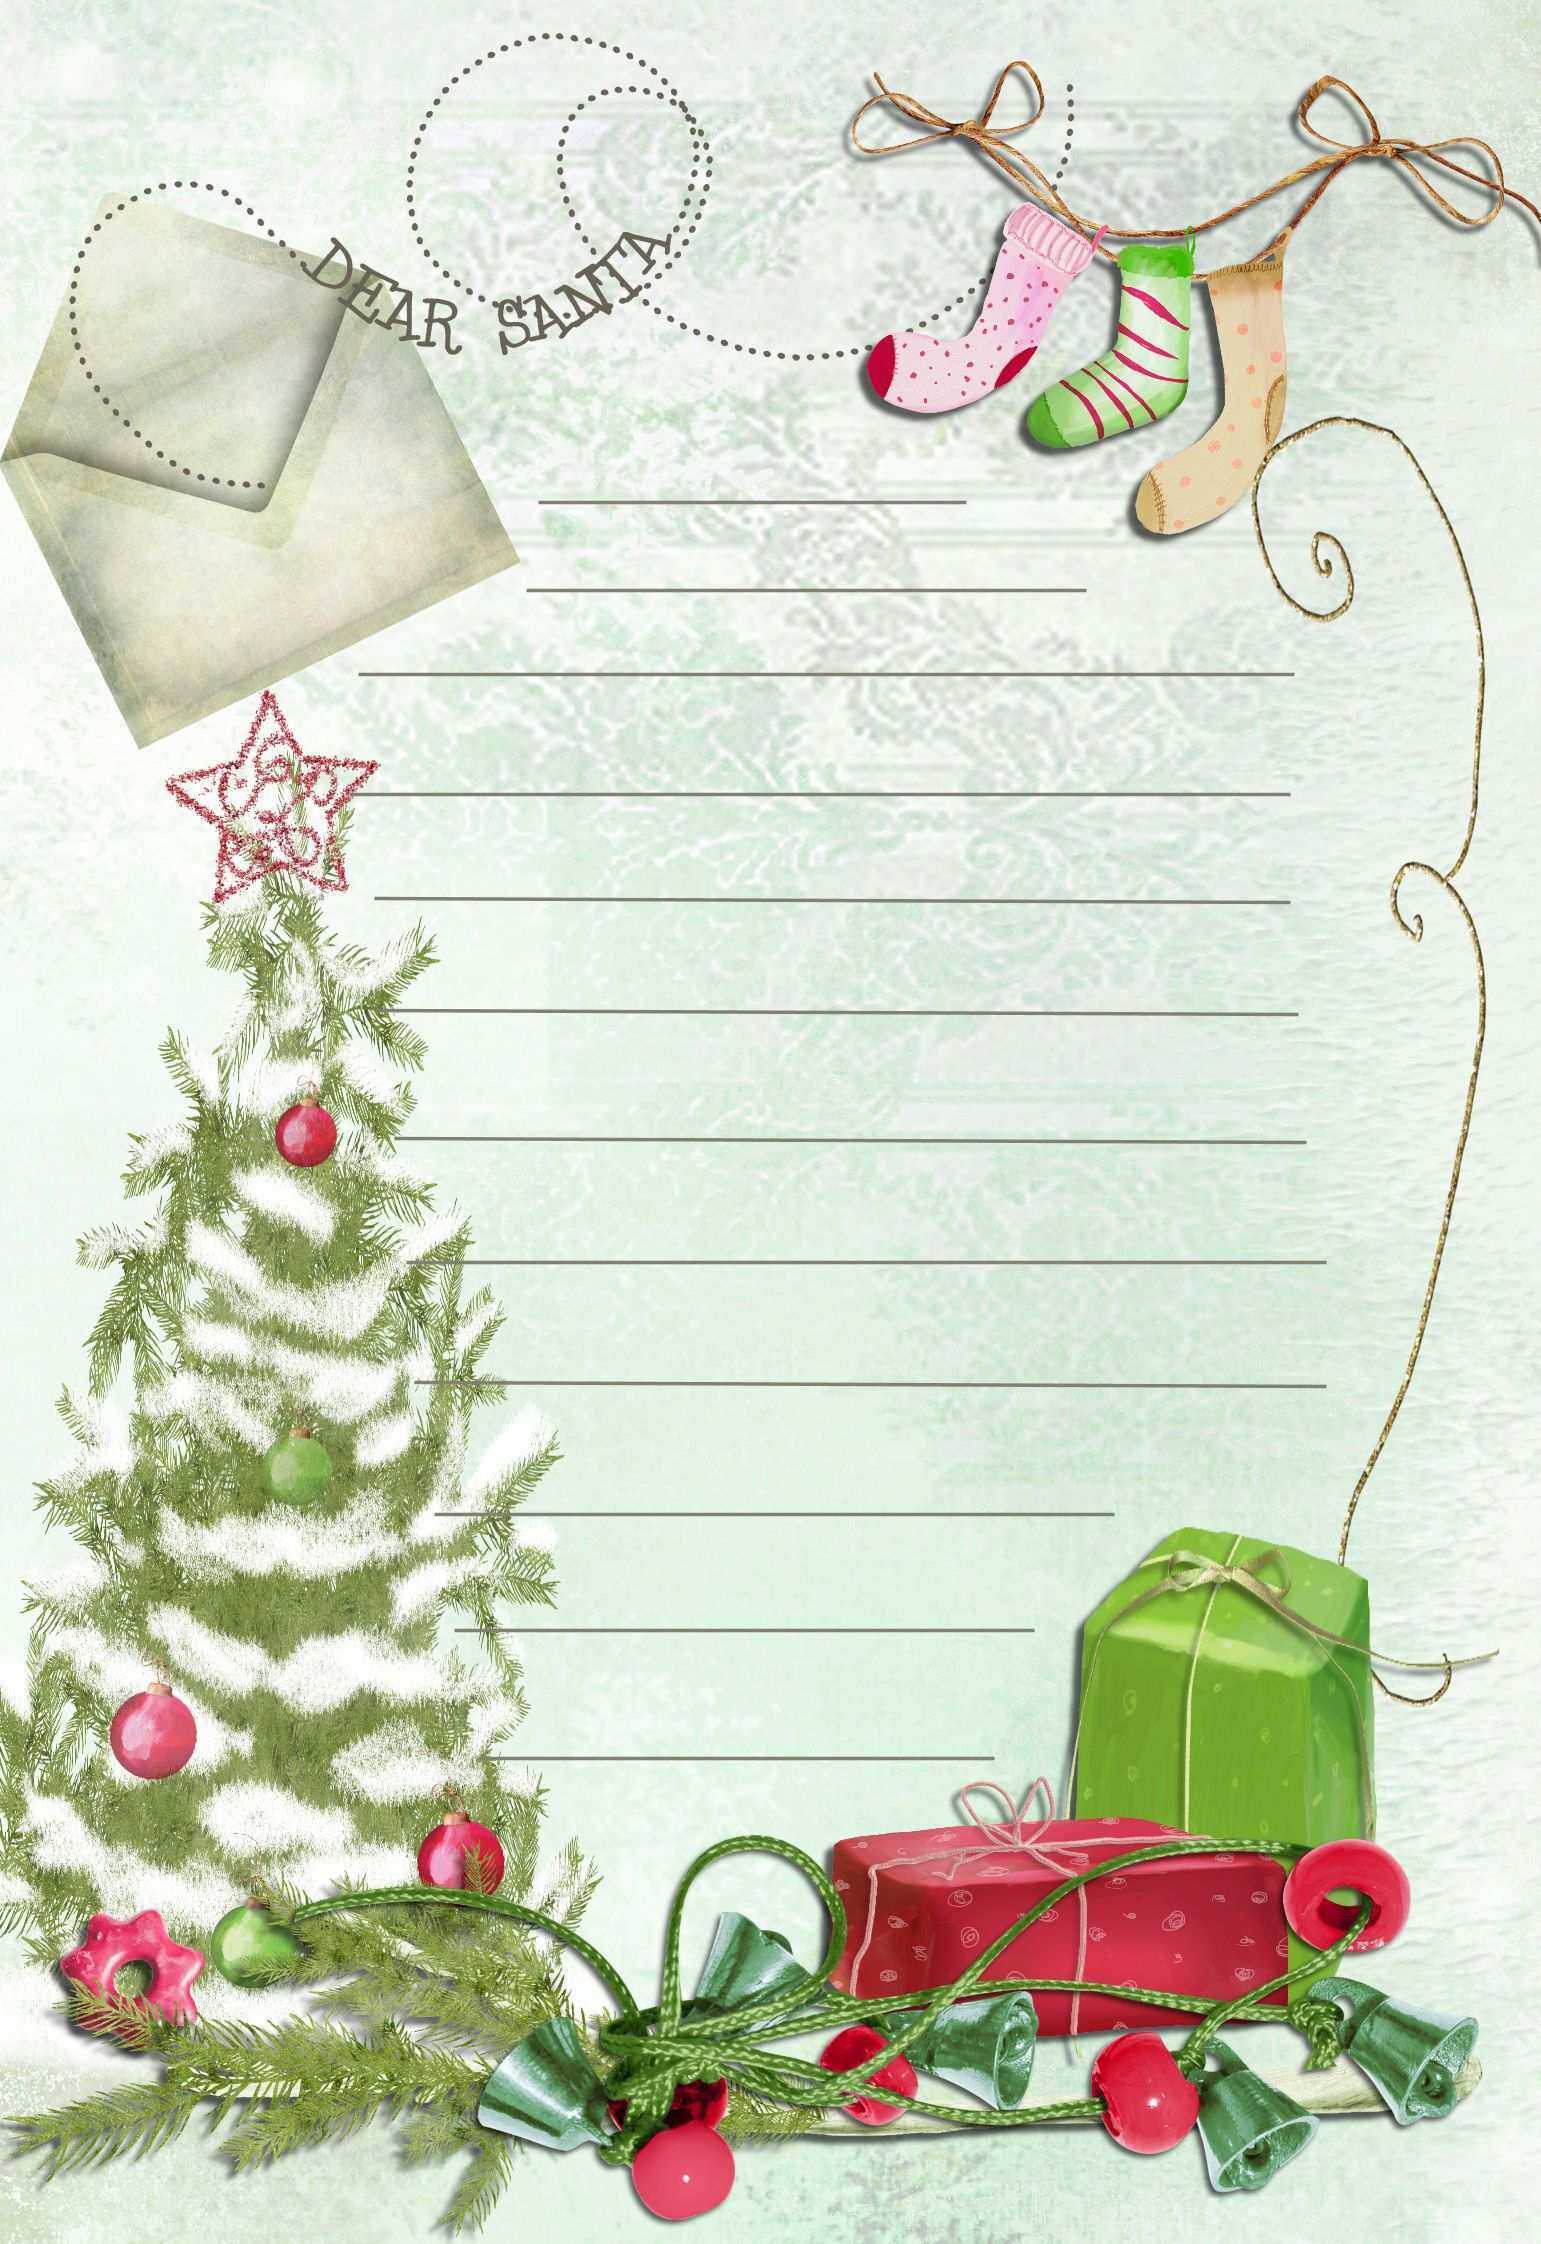 Christmas Card Note Template – Cards Design Templates Intended For Christmas Note Card Templates